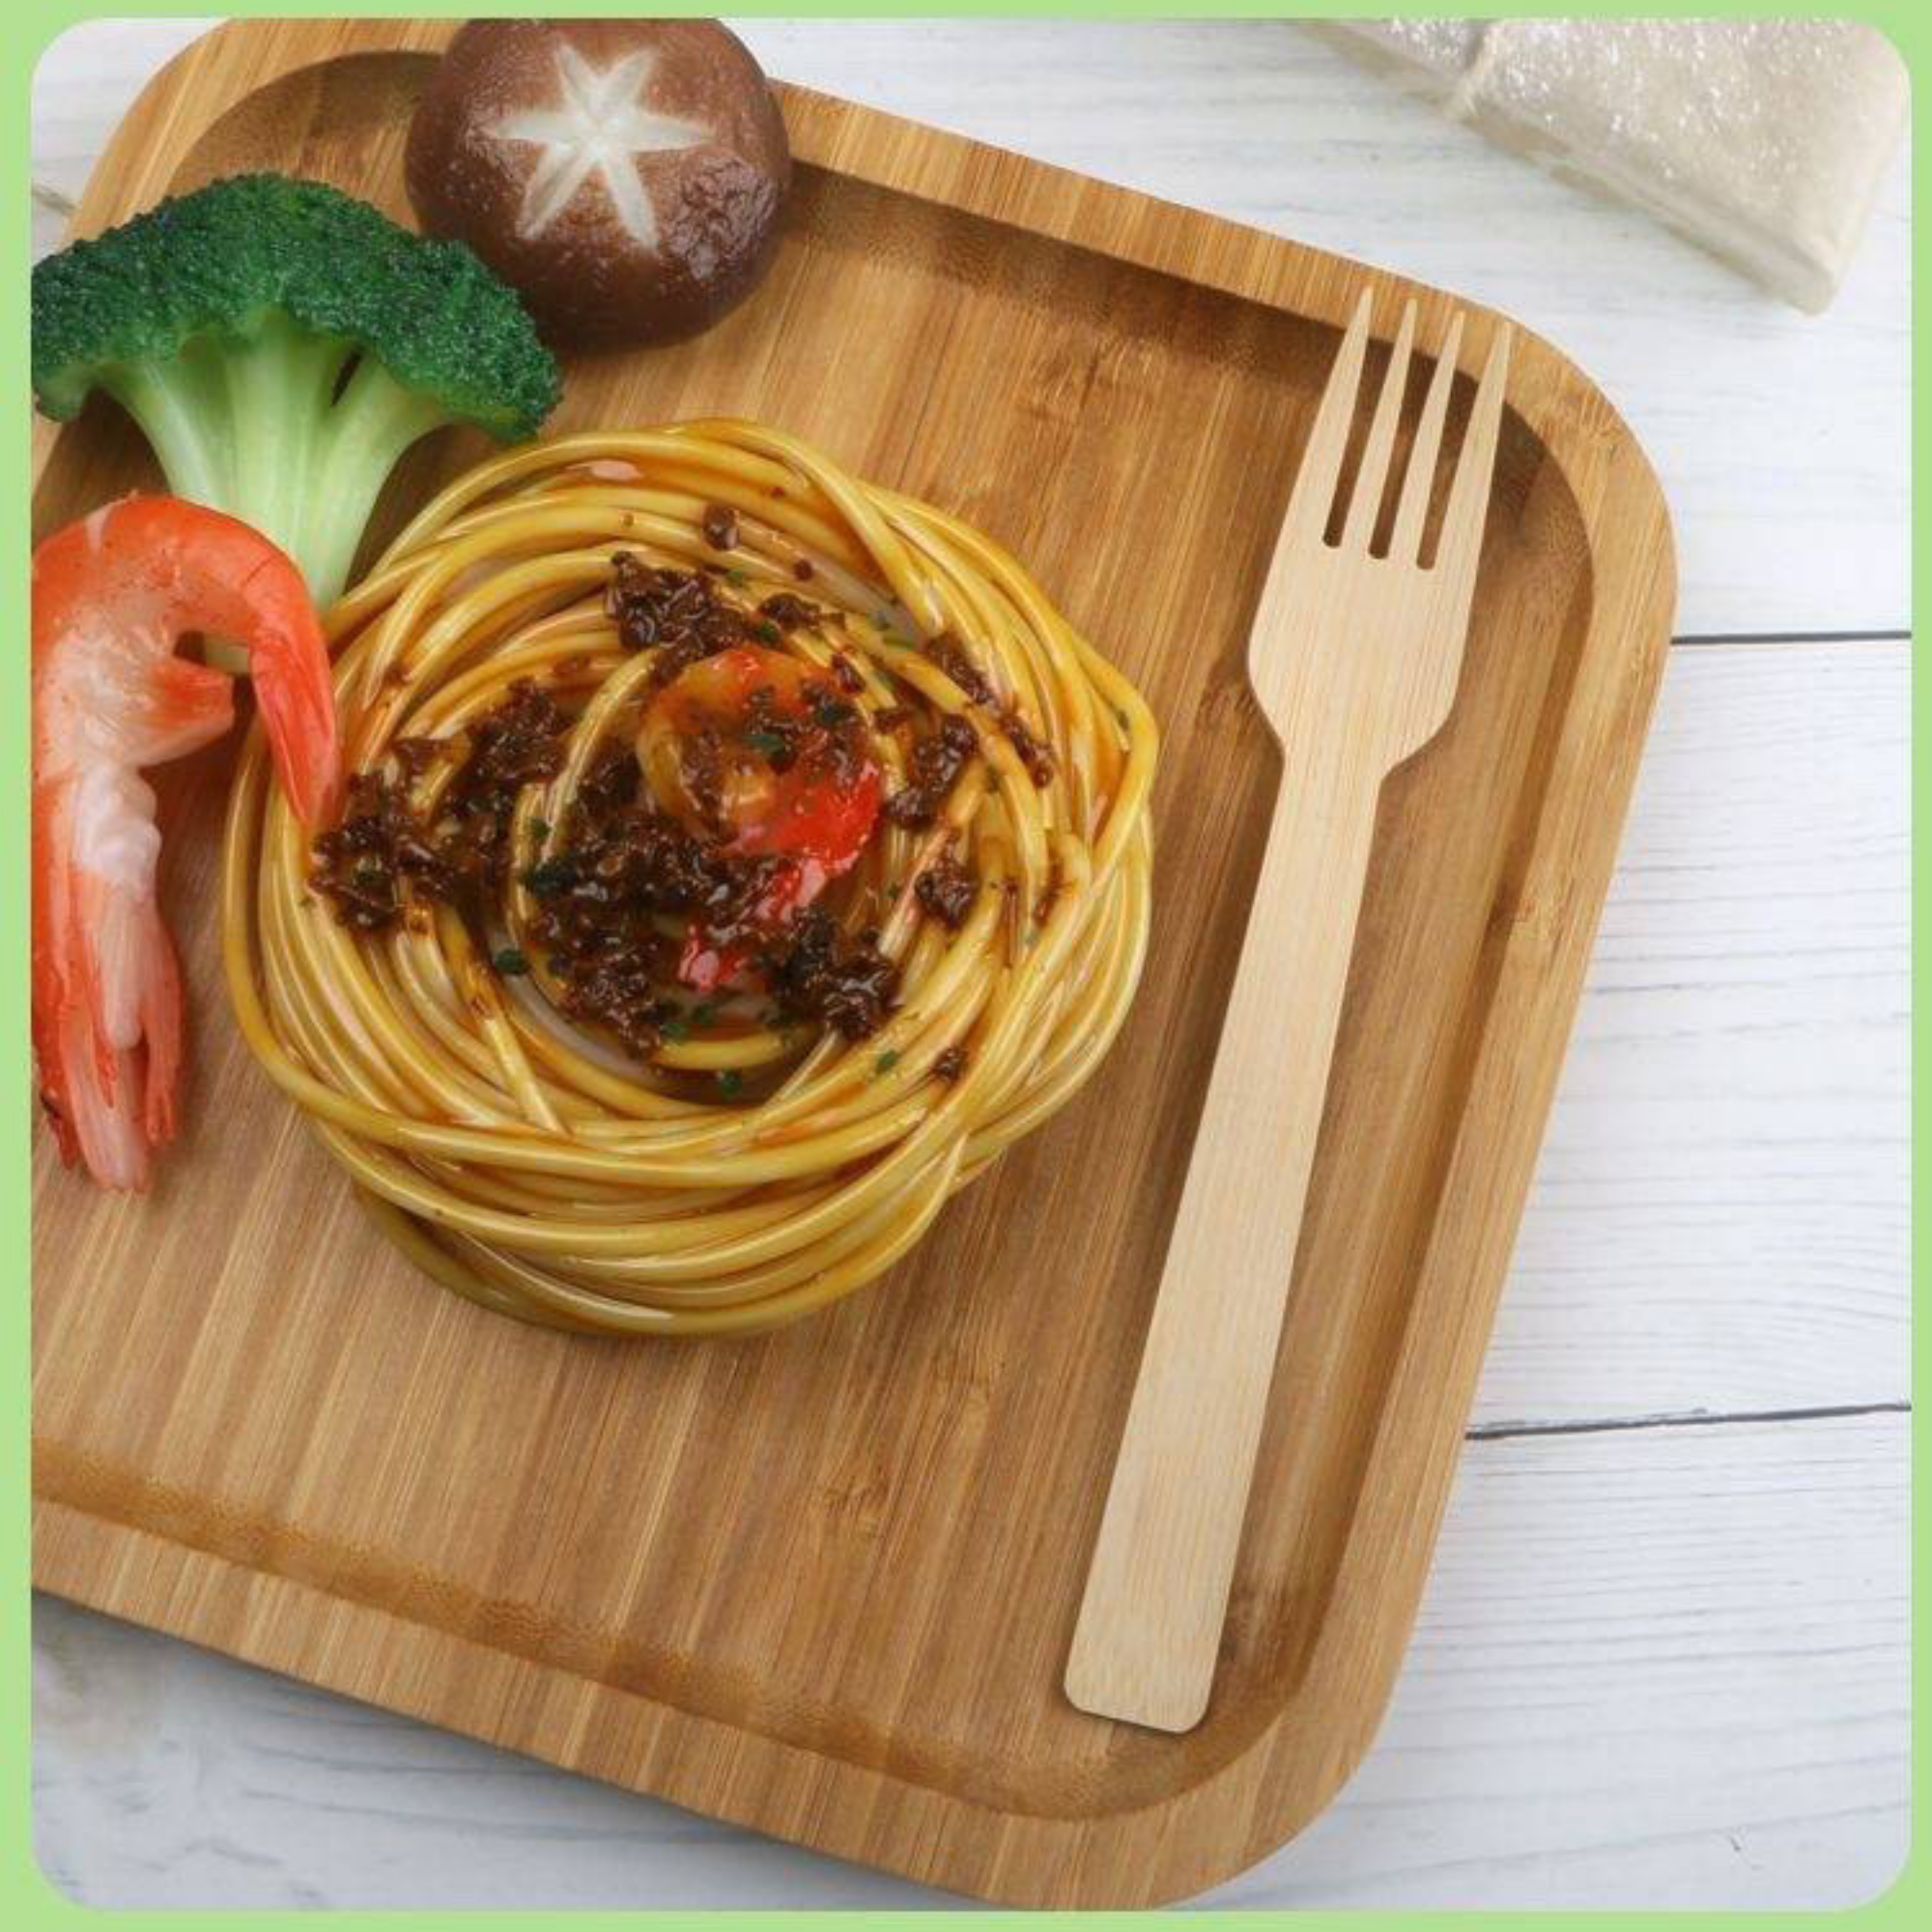 Wooden tray with pasta, broccoli, shrimp, and a mushroom, accompanied by a Holy City Straw Co. bamboo fork.